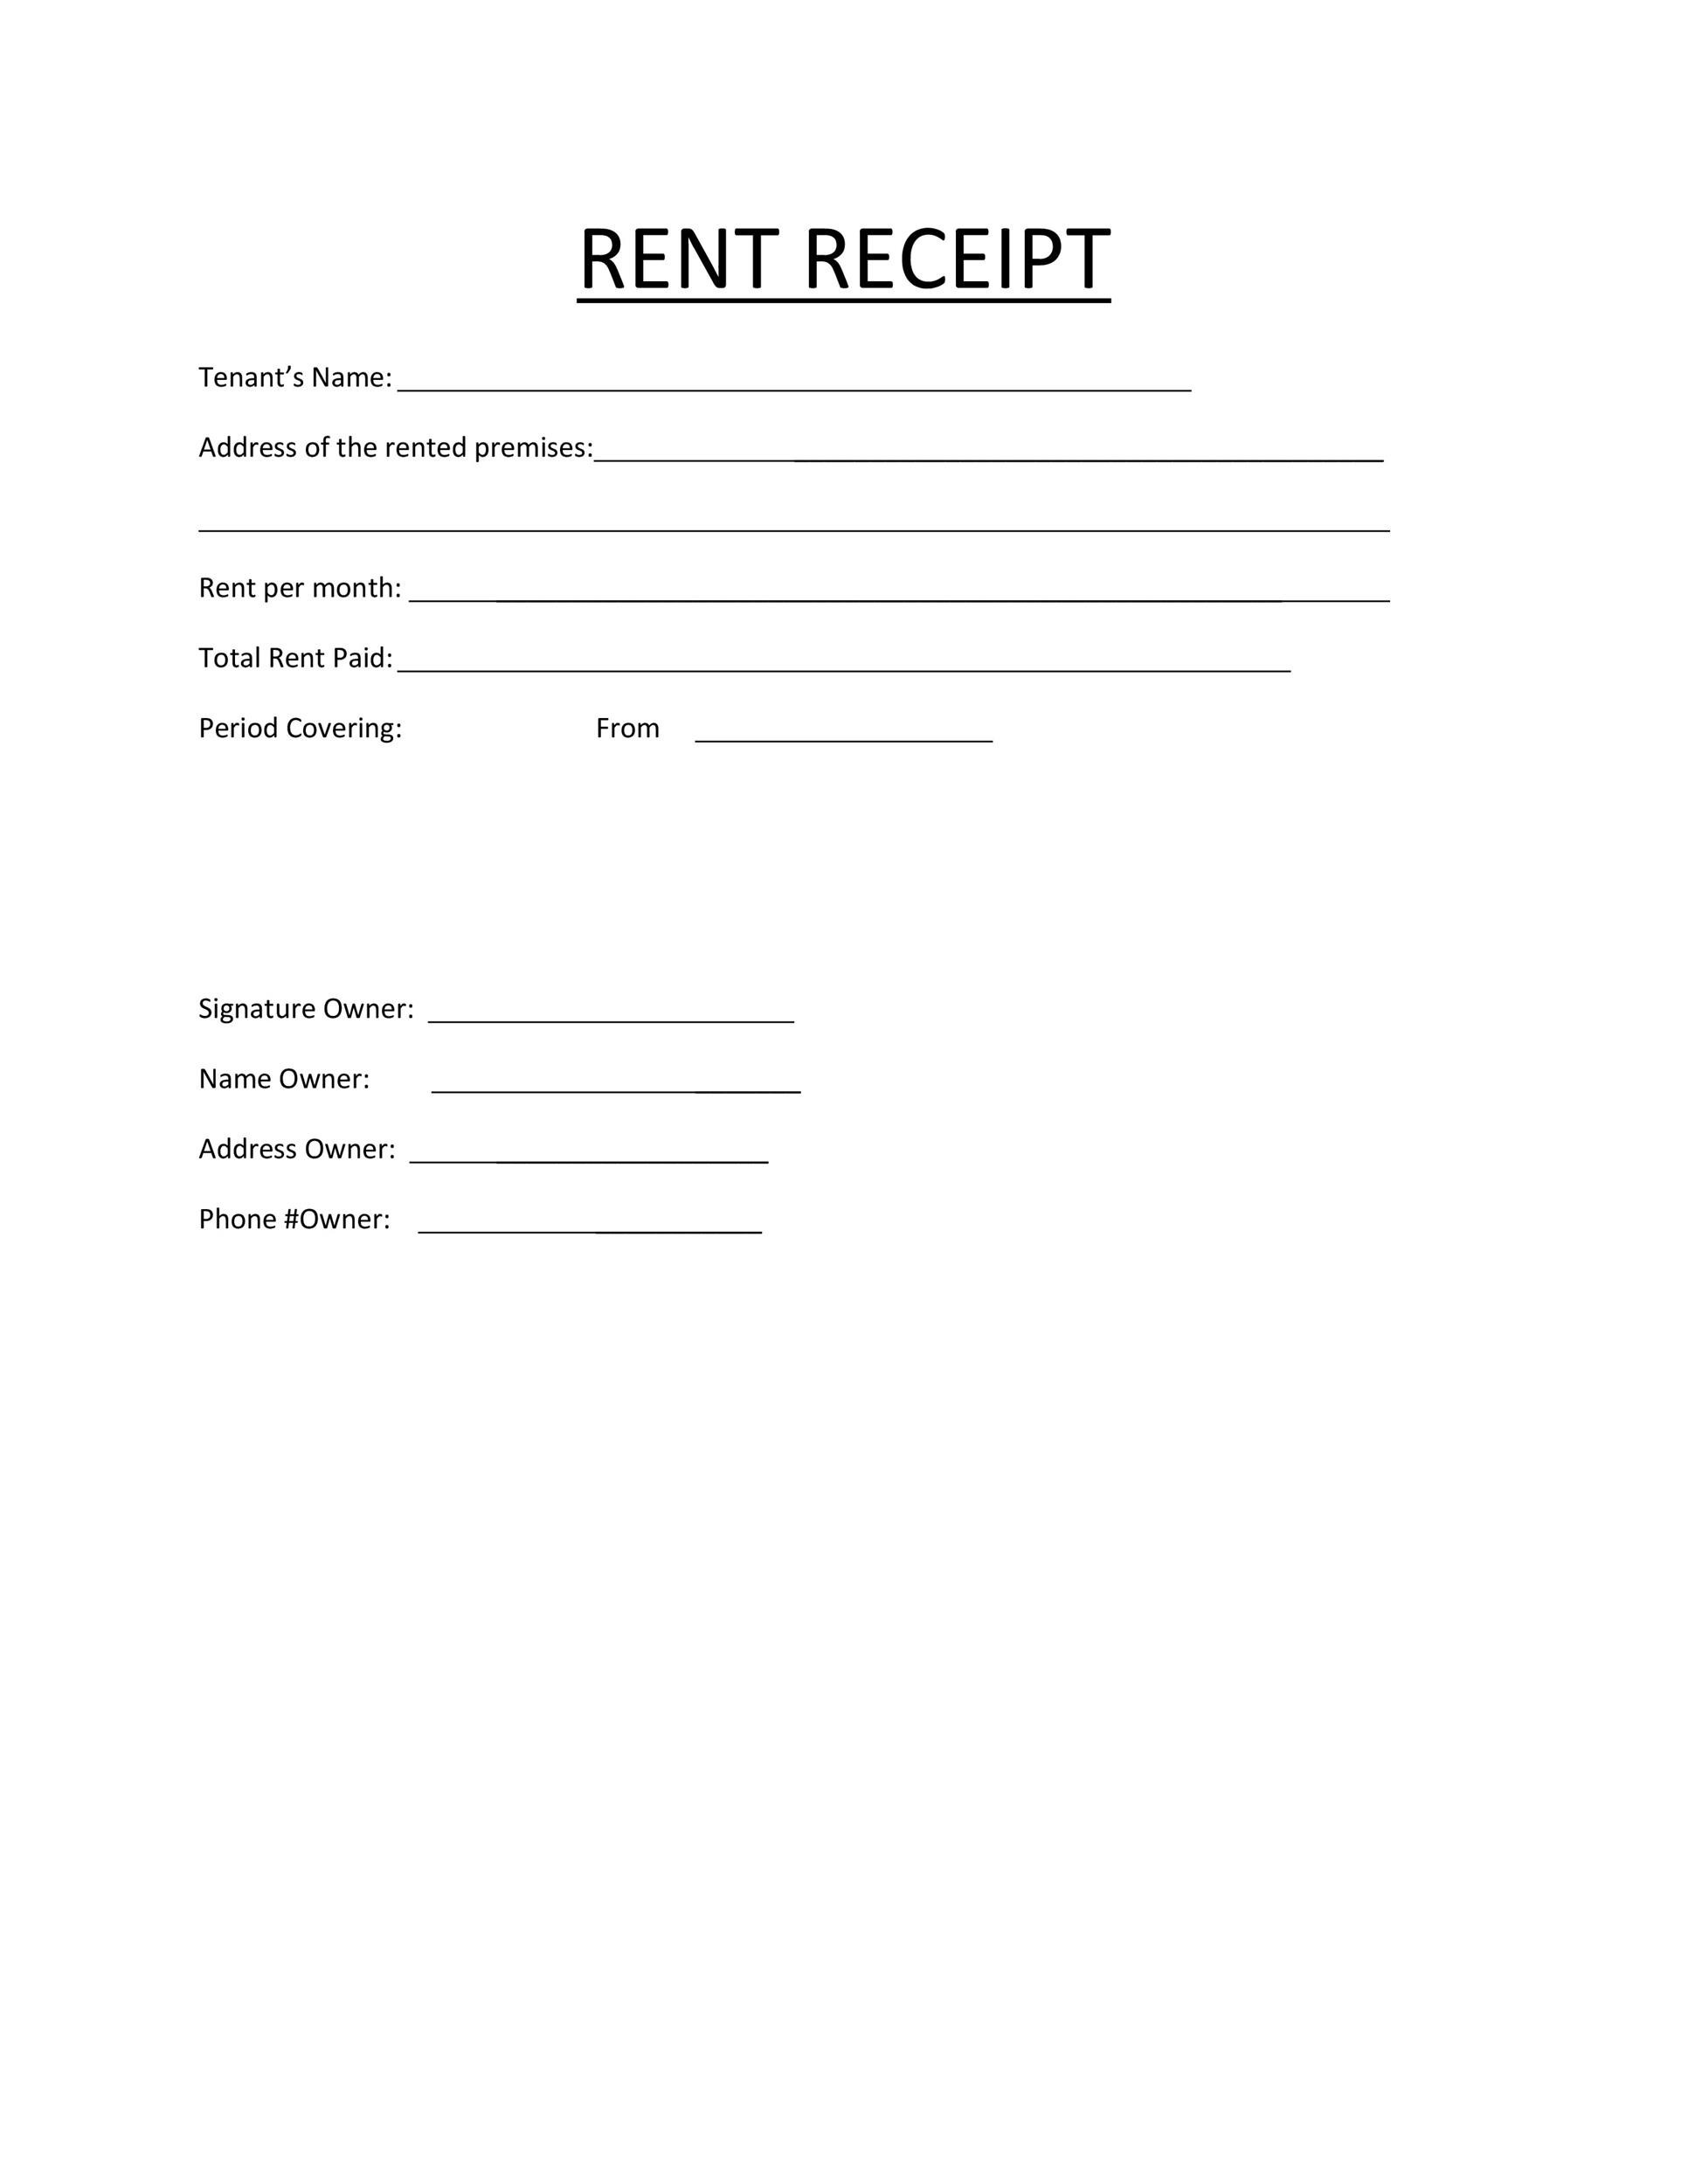 fantastic-template-for-rent-receipt-india-stunning-receipt-templates